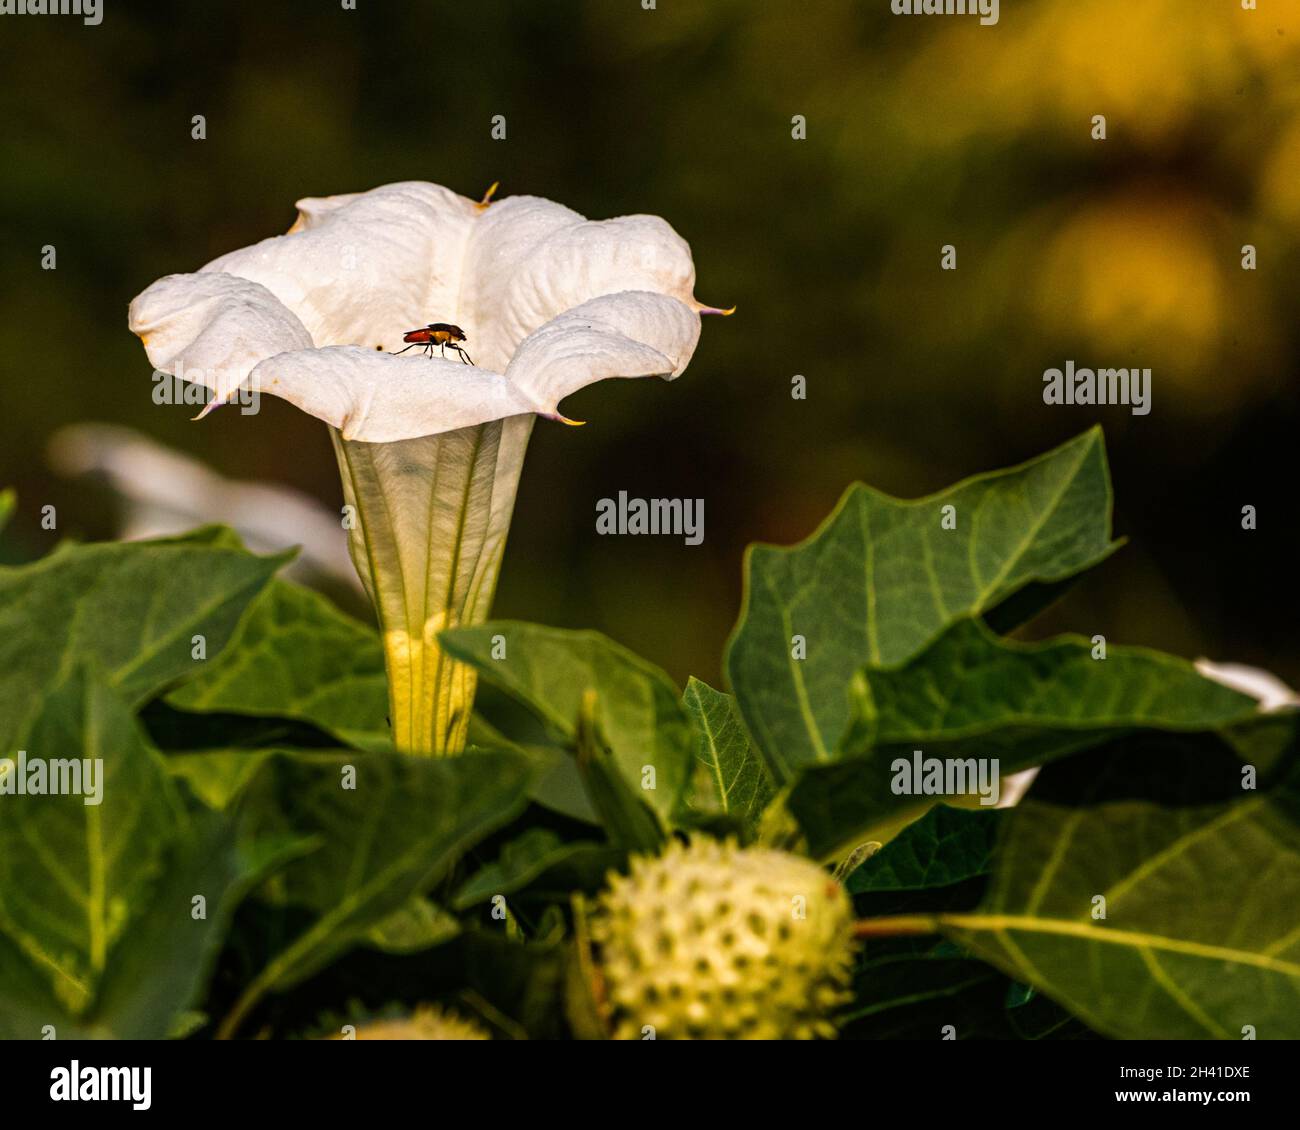 A flower of Datura Metel with a insect in the garden Stock Photo